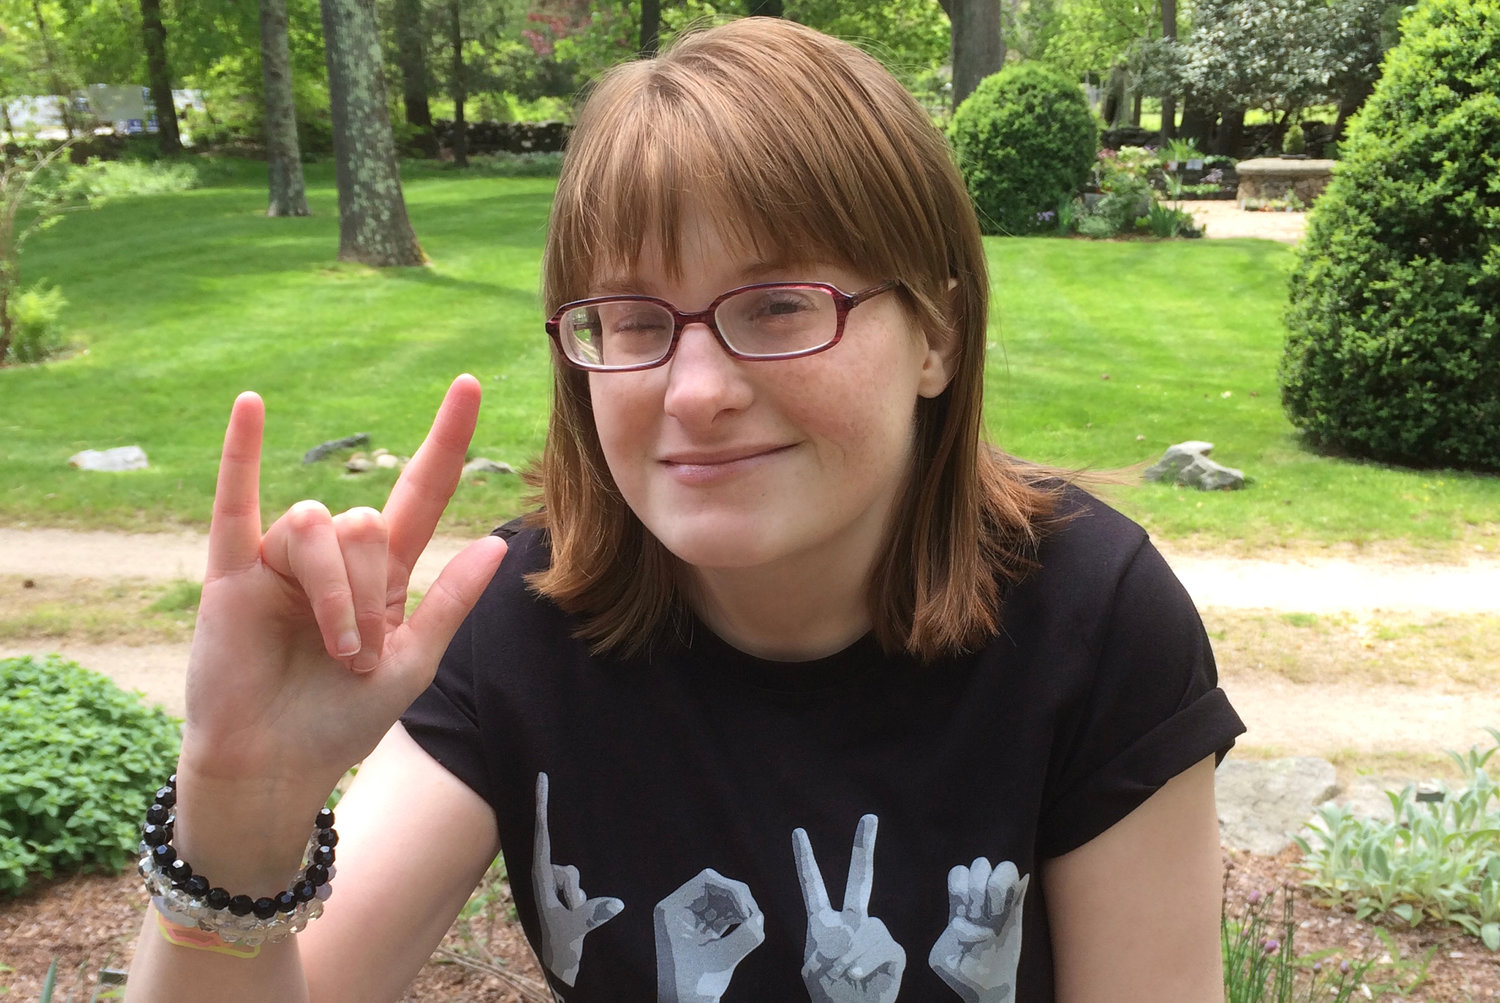 Emily Maxwell’s designs spread positive messages through ASL signs